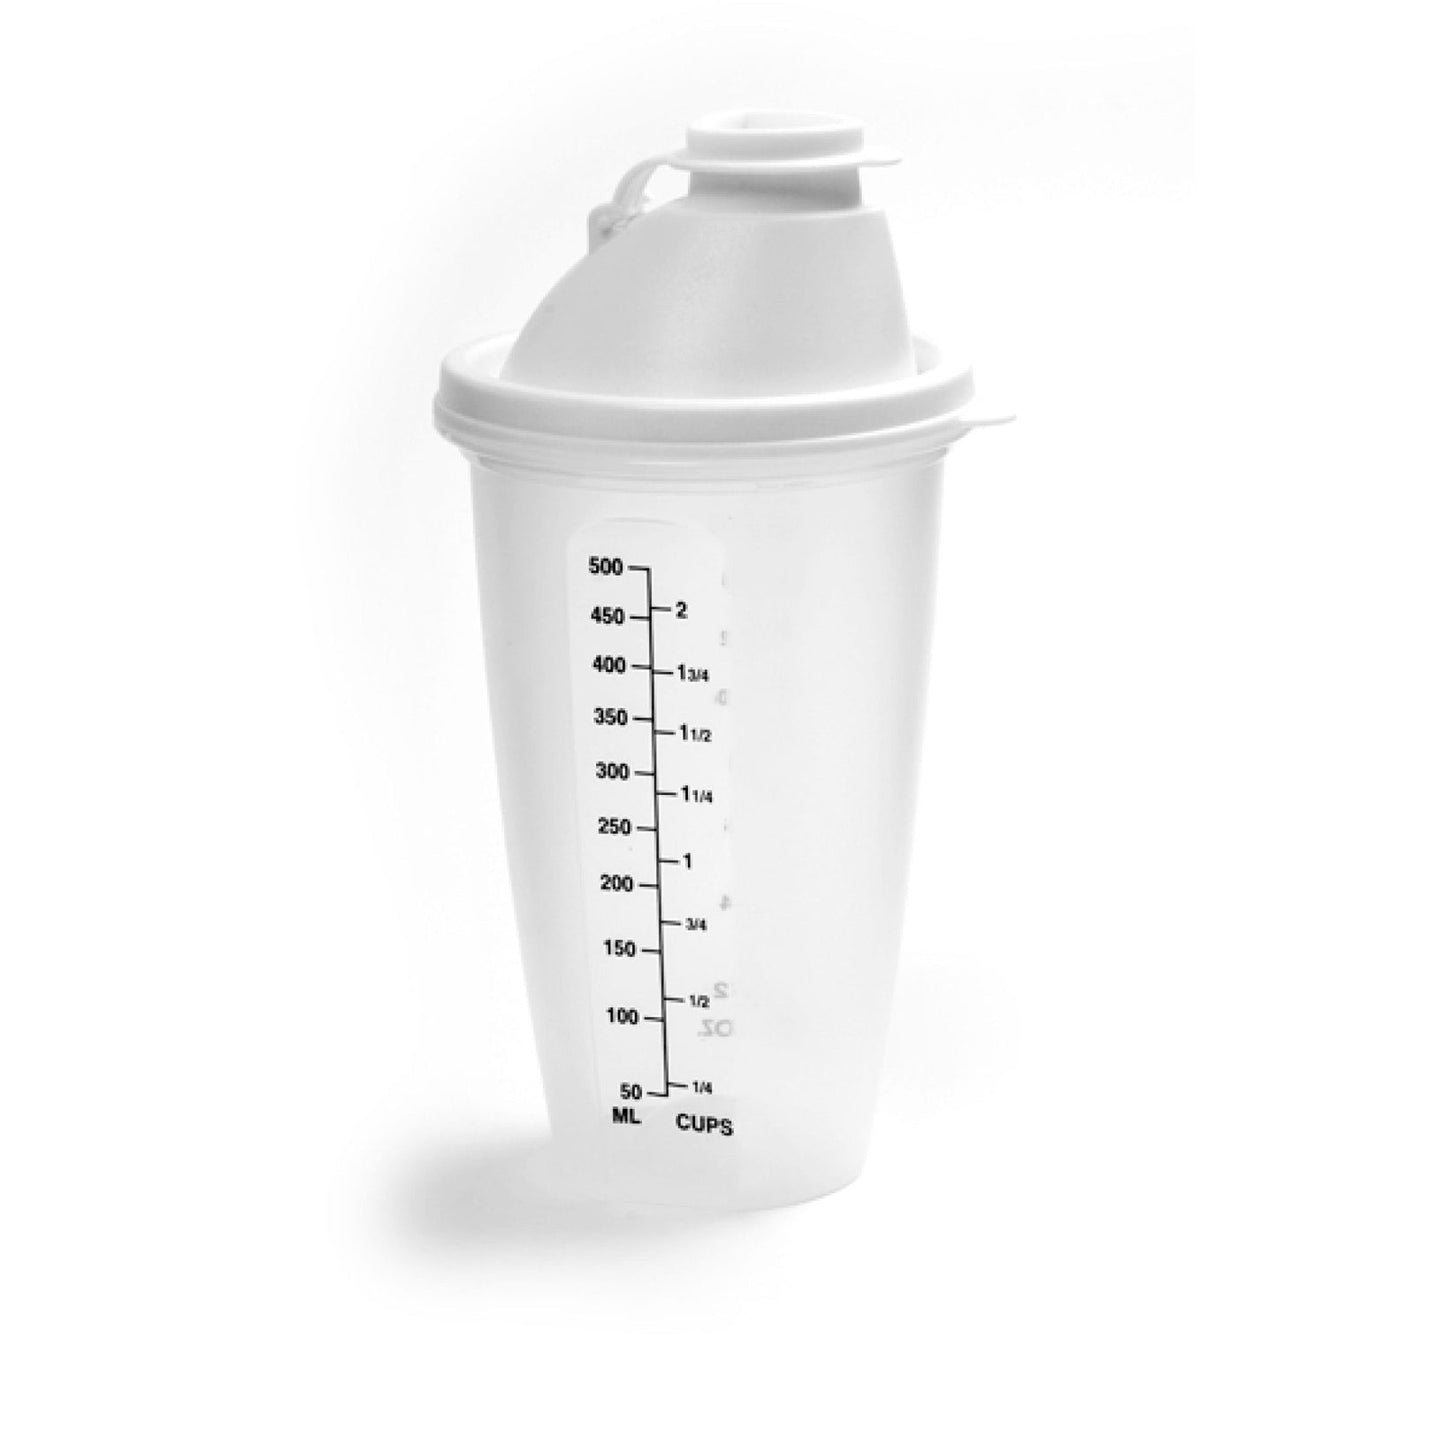 2 Cup Measuring Shaker